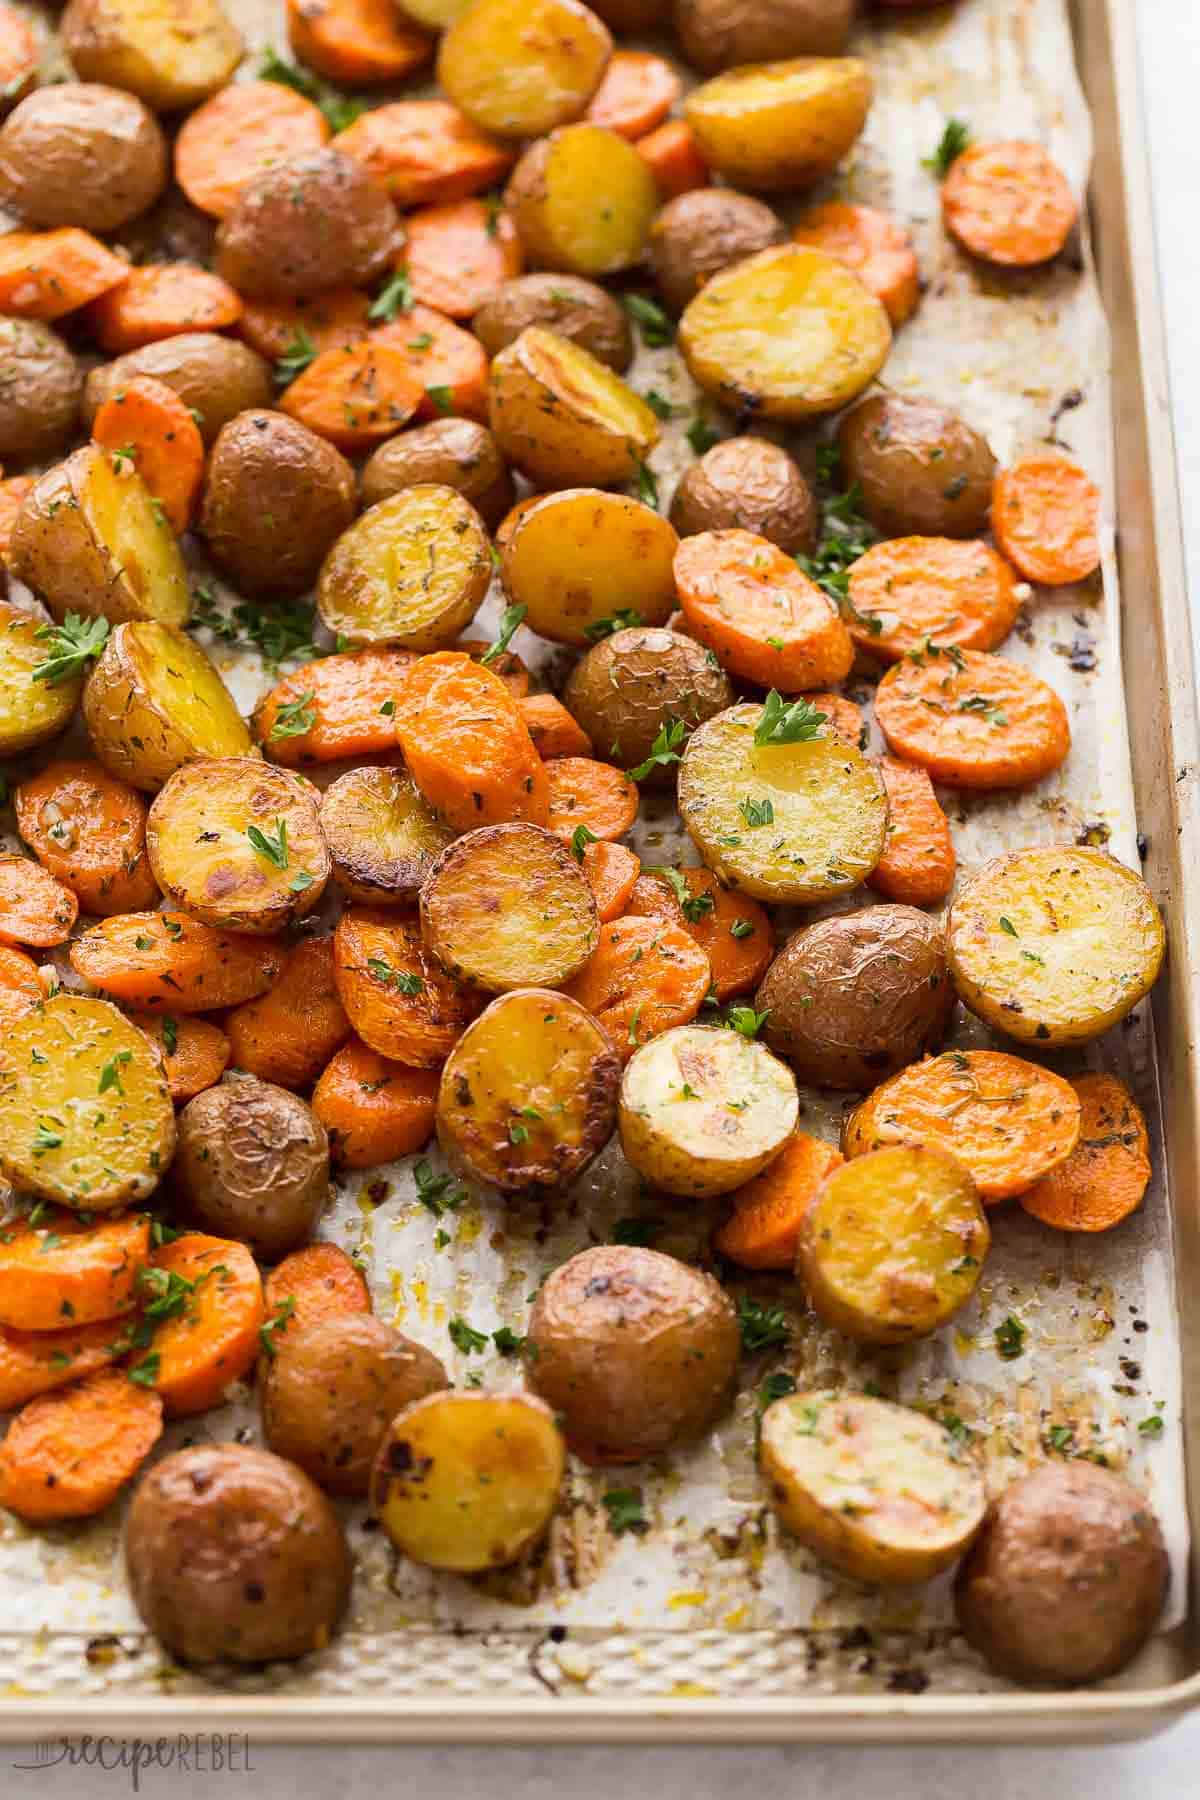 roasted potatoes and carrots on a sheet pan covered in parchment paper.